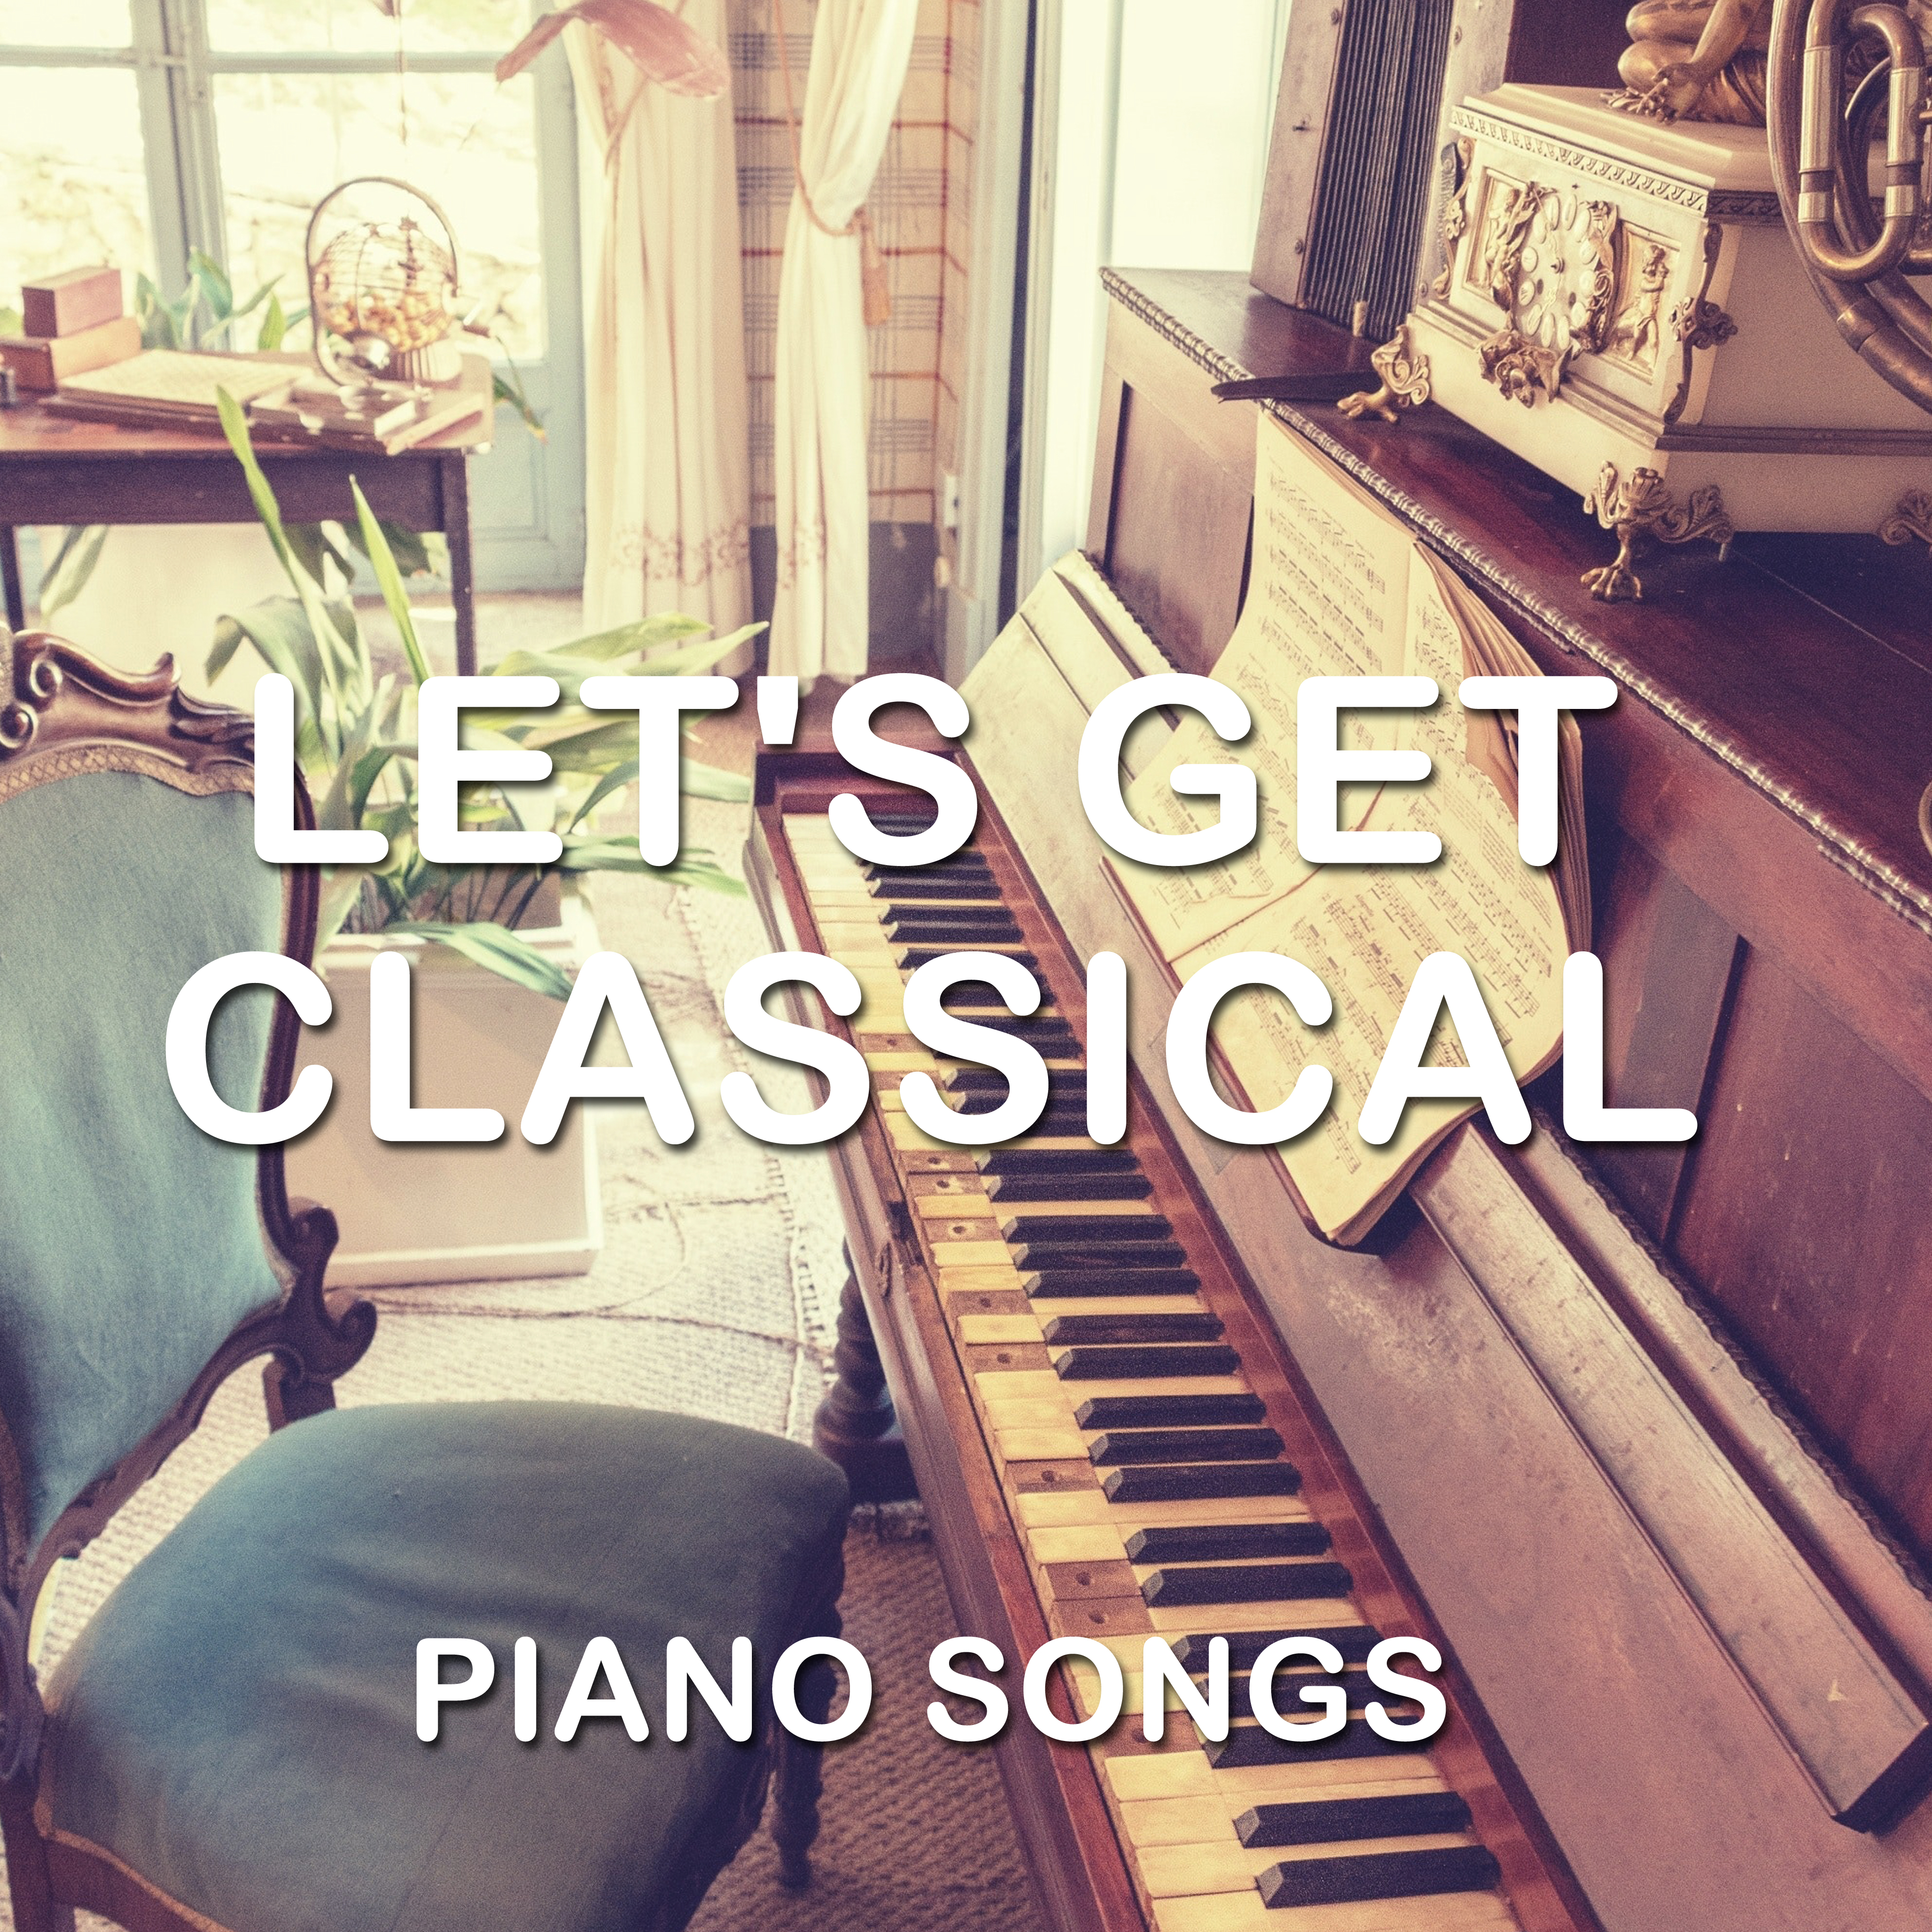 14 Let's Get Classical Piano Songs